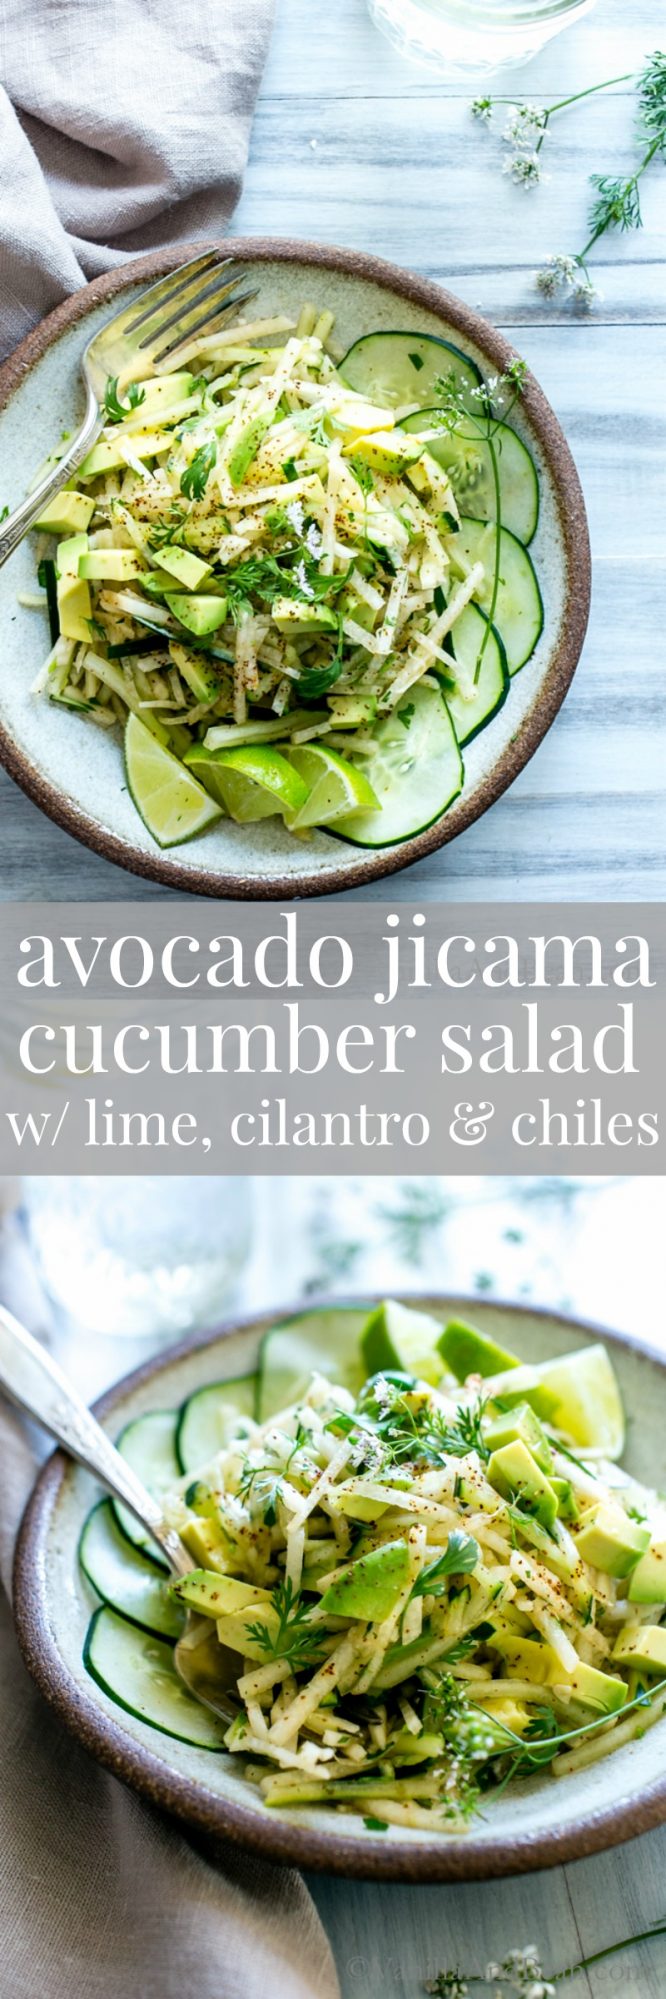 Crunchy and creamy with a hint of spice this hydrating, and nourishing Avocado Jicama Cucumber Salad with lime, cilantro and a pinch chiles will take the edge off Summertime heat. Vegan + GF